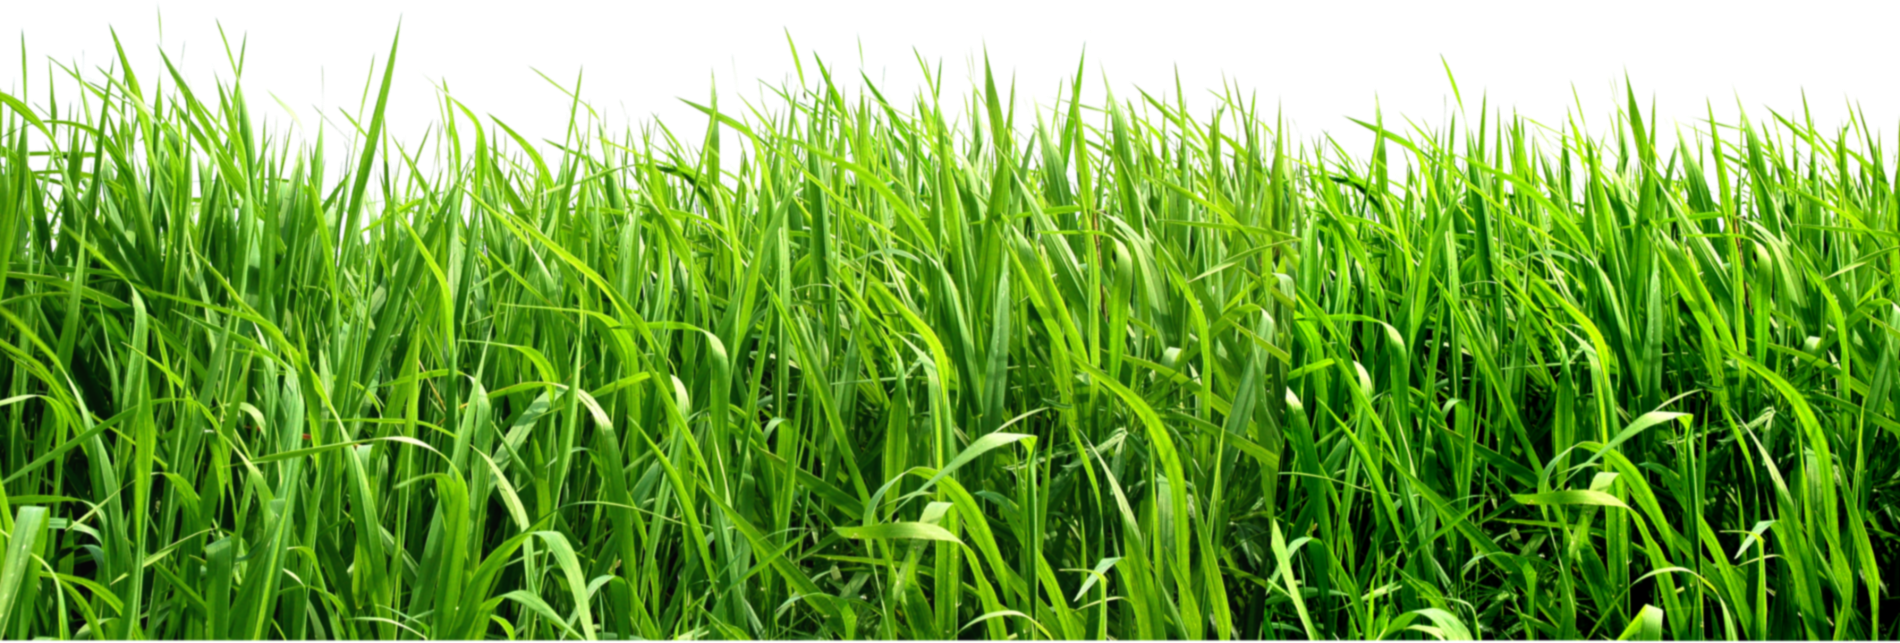 Grass Png Image, Green Grass Png Picture - Free Grass Png (1900x643)